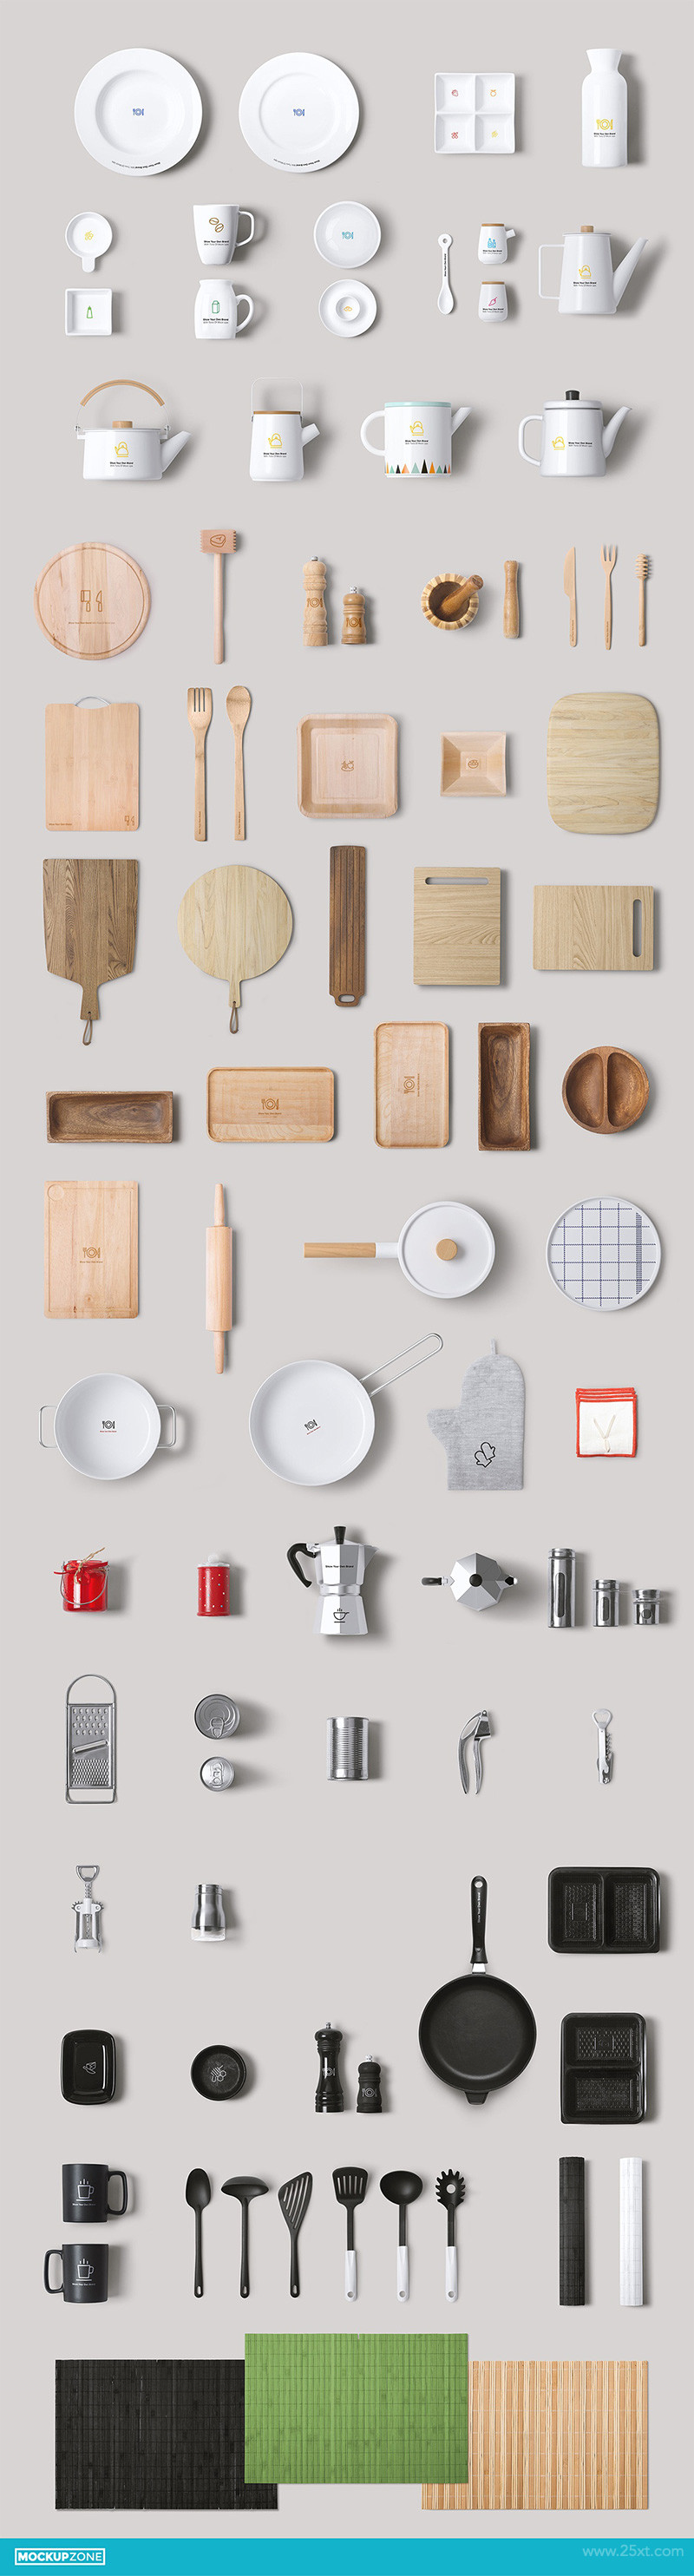 plates boards and pans.jpg